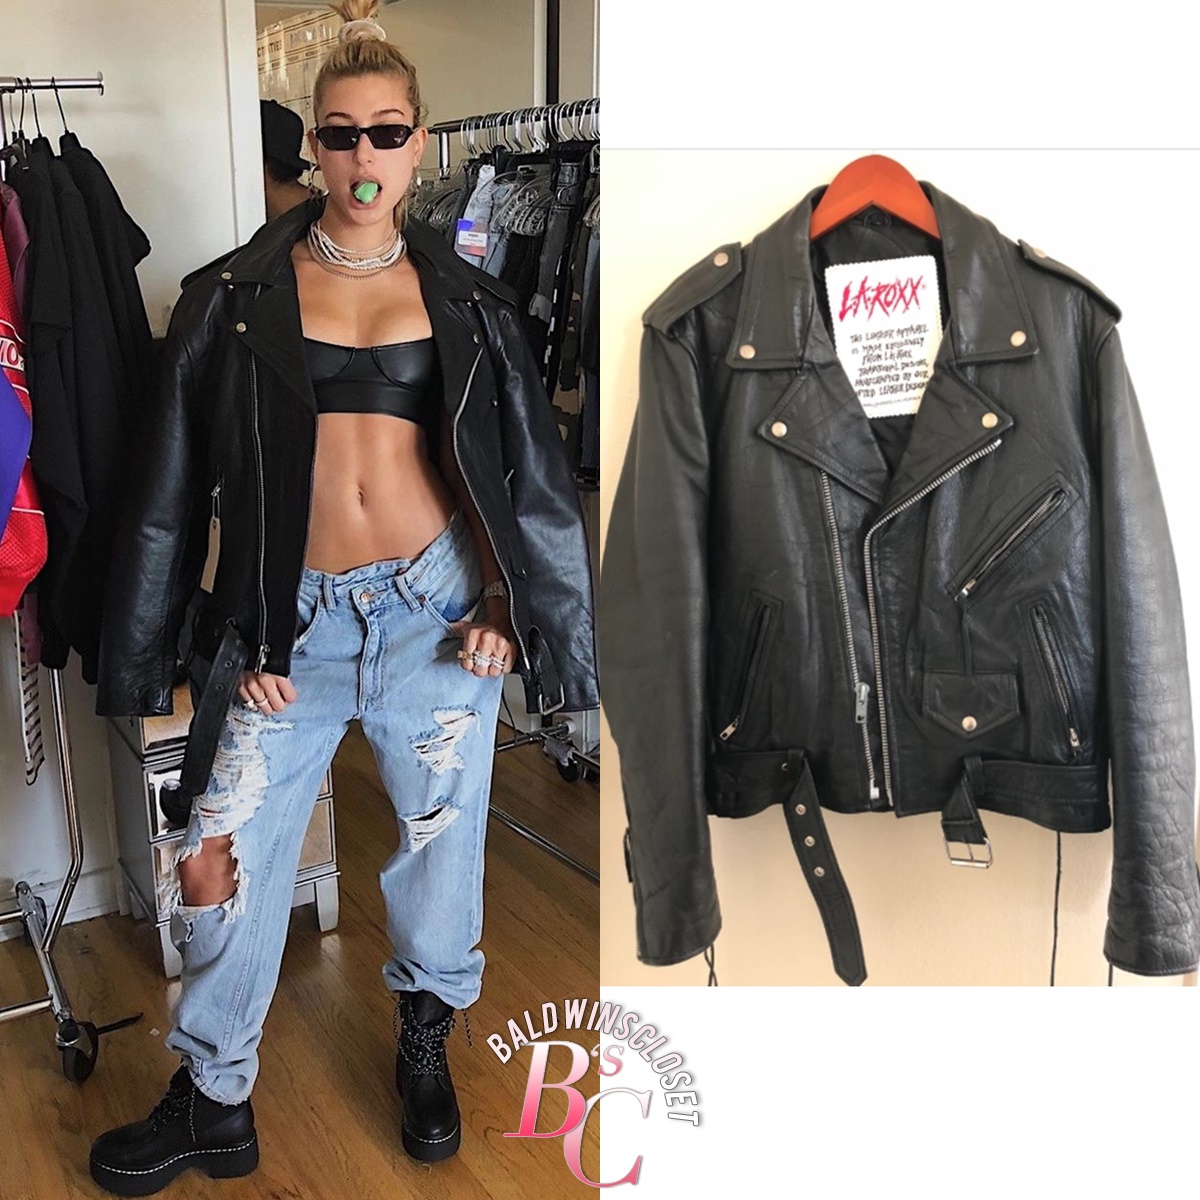 Hailey Bieber Coachella Valley Music and Arts Festival Leather Jacket